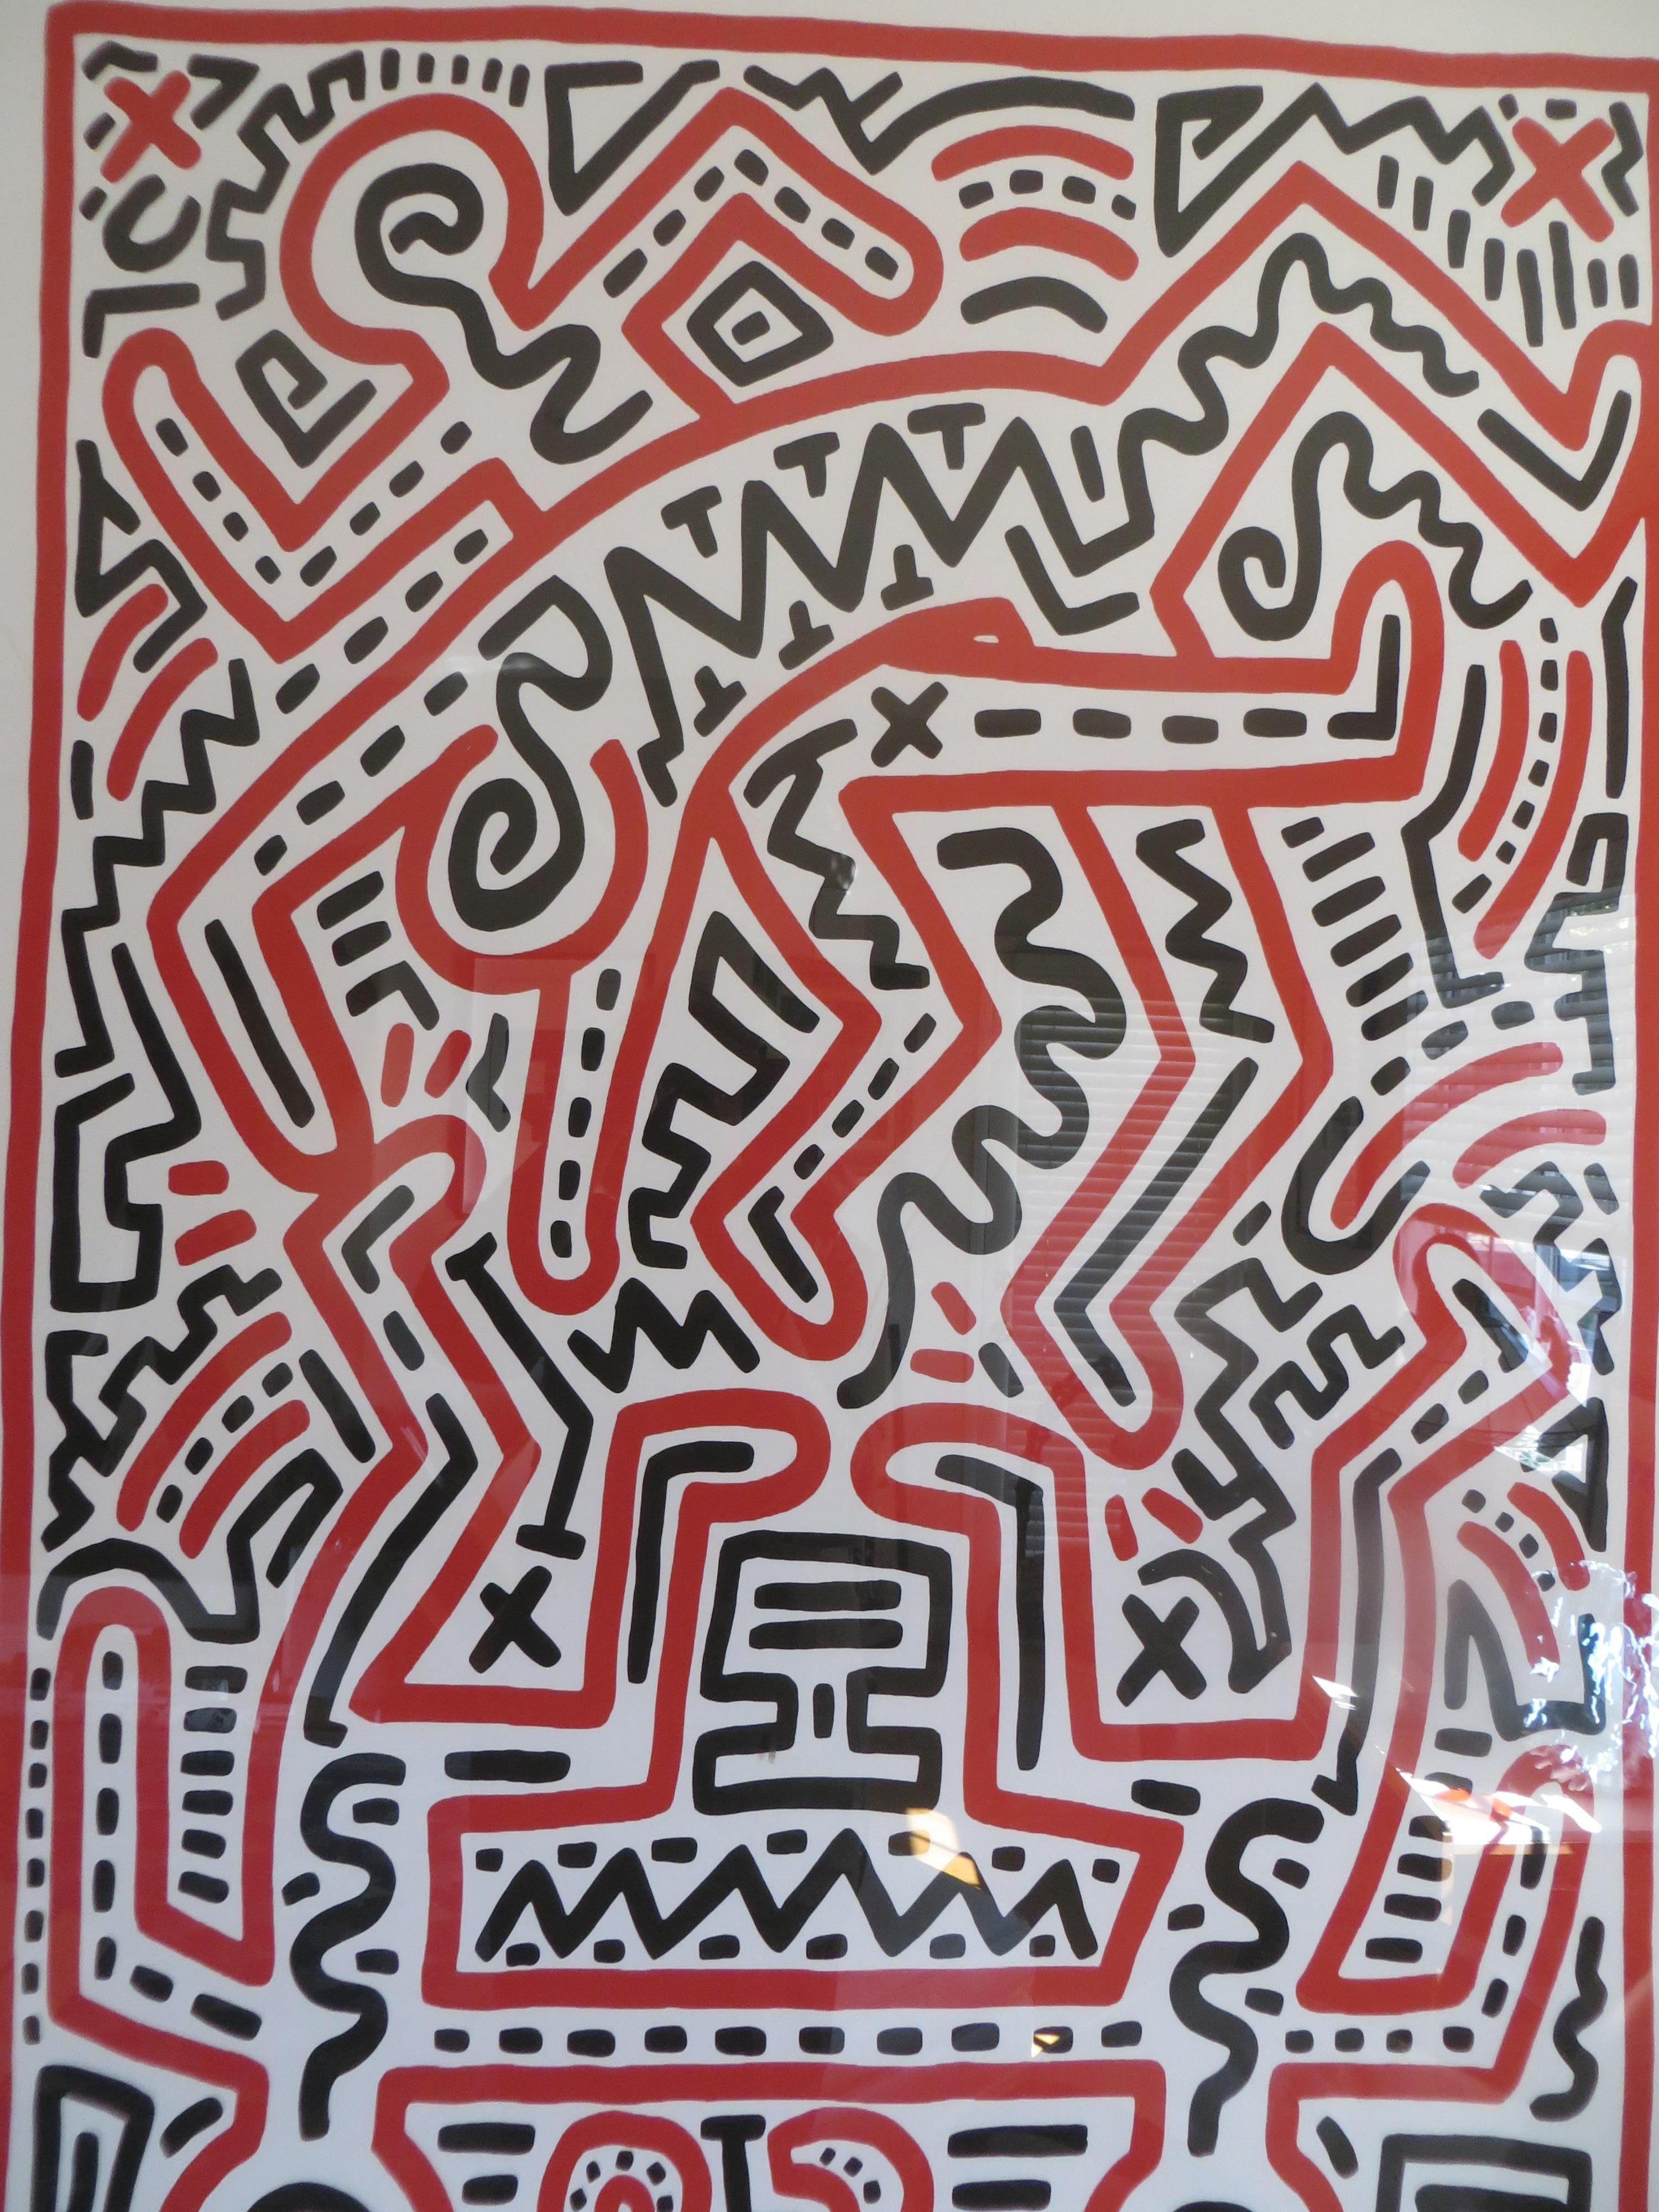 Fun Gallery Exhibition 1983  by Keith Haring Screen Print  2